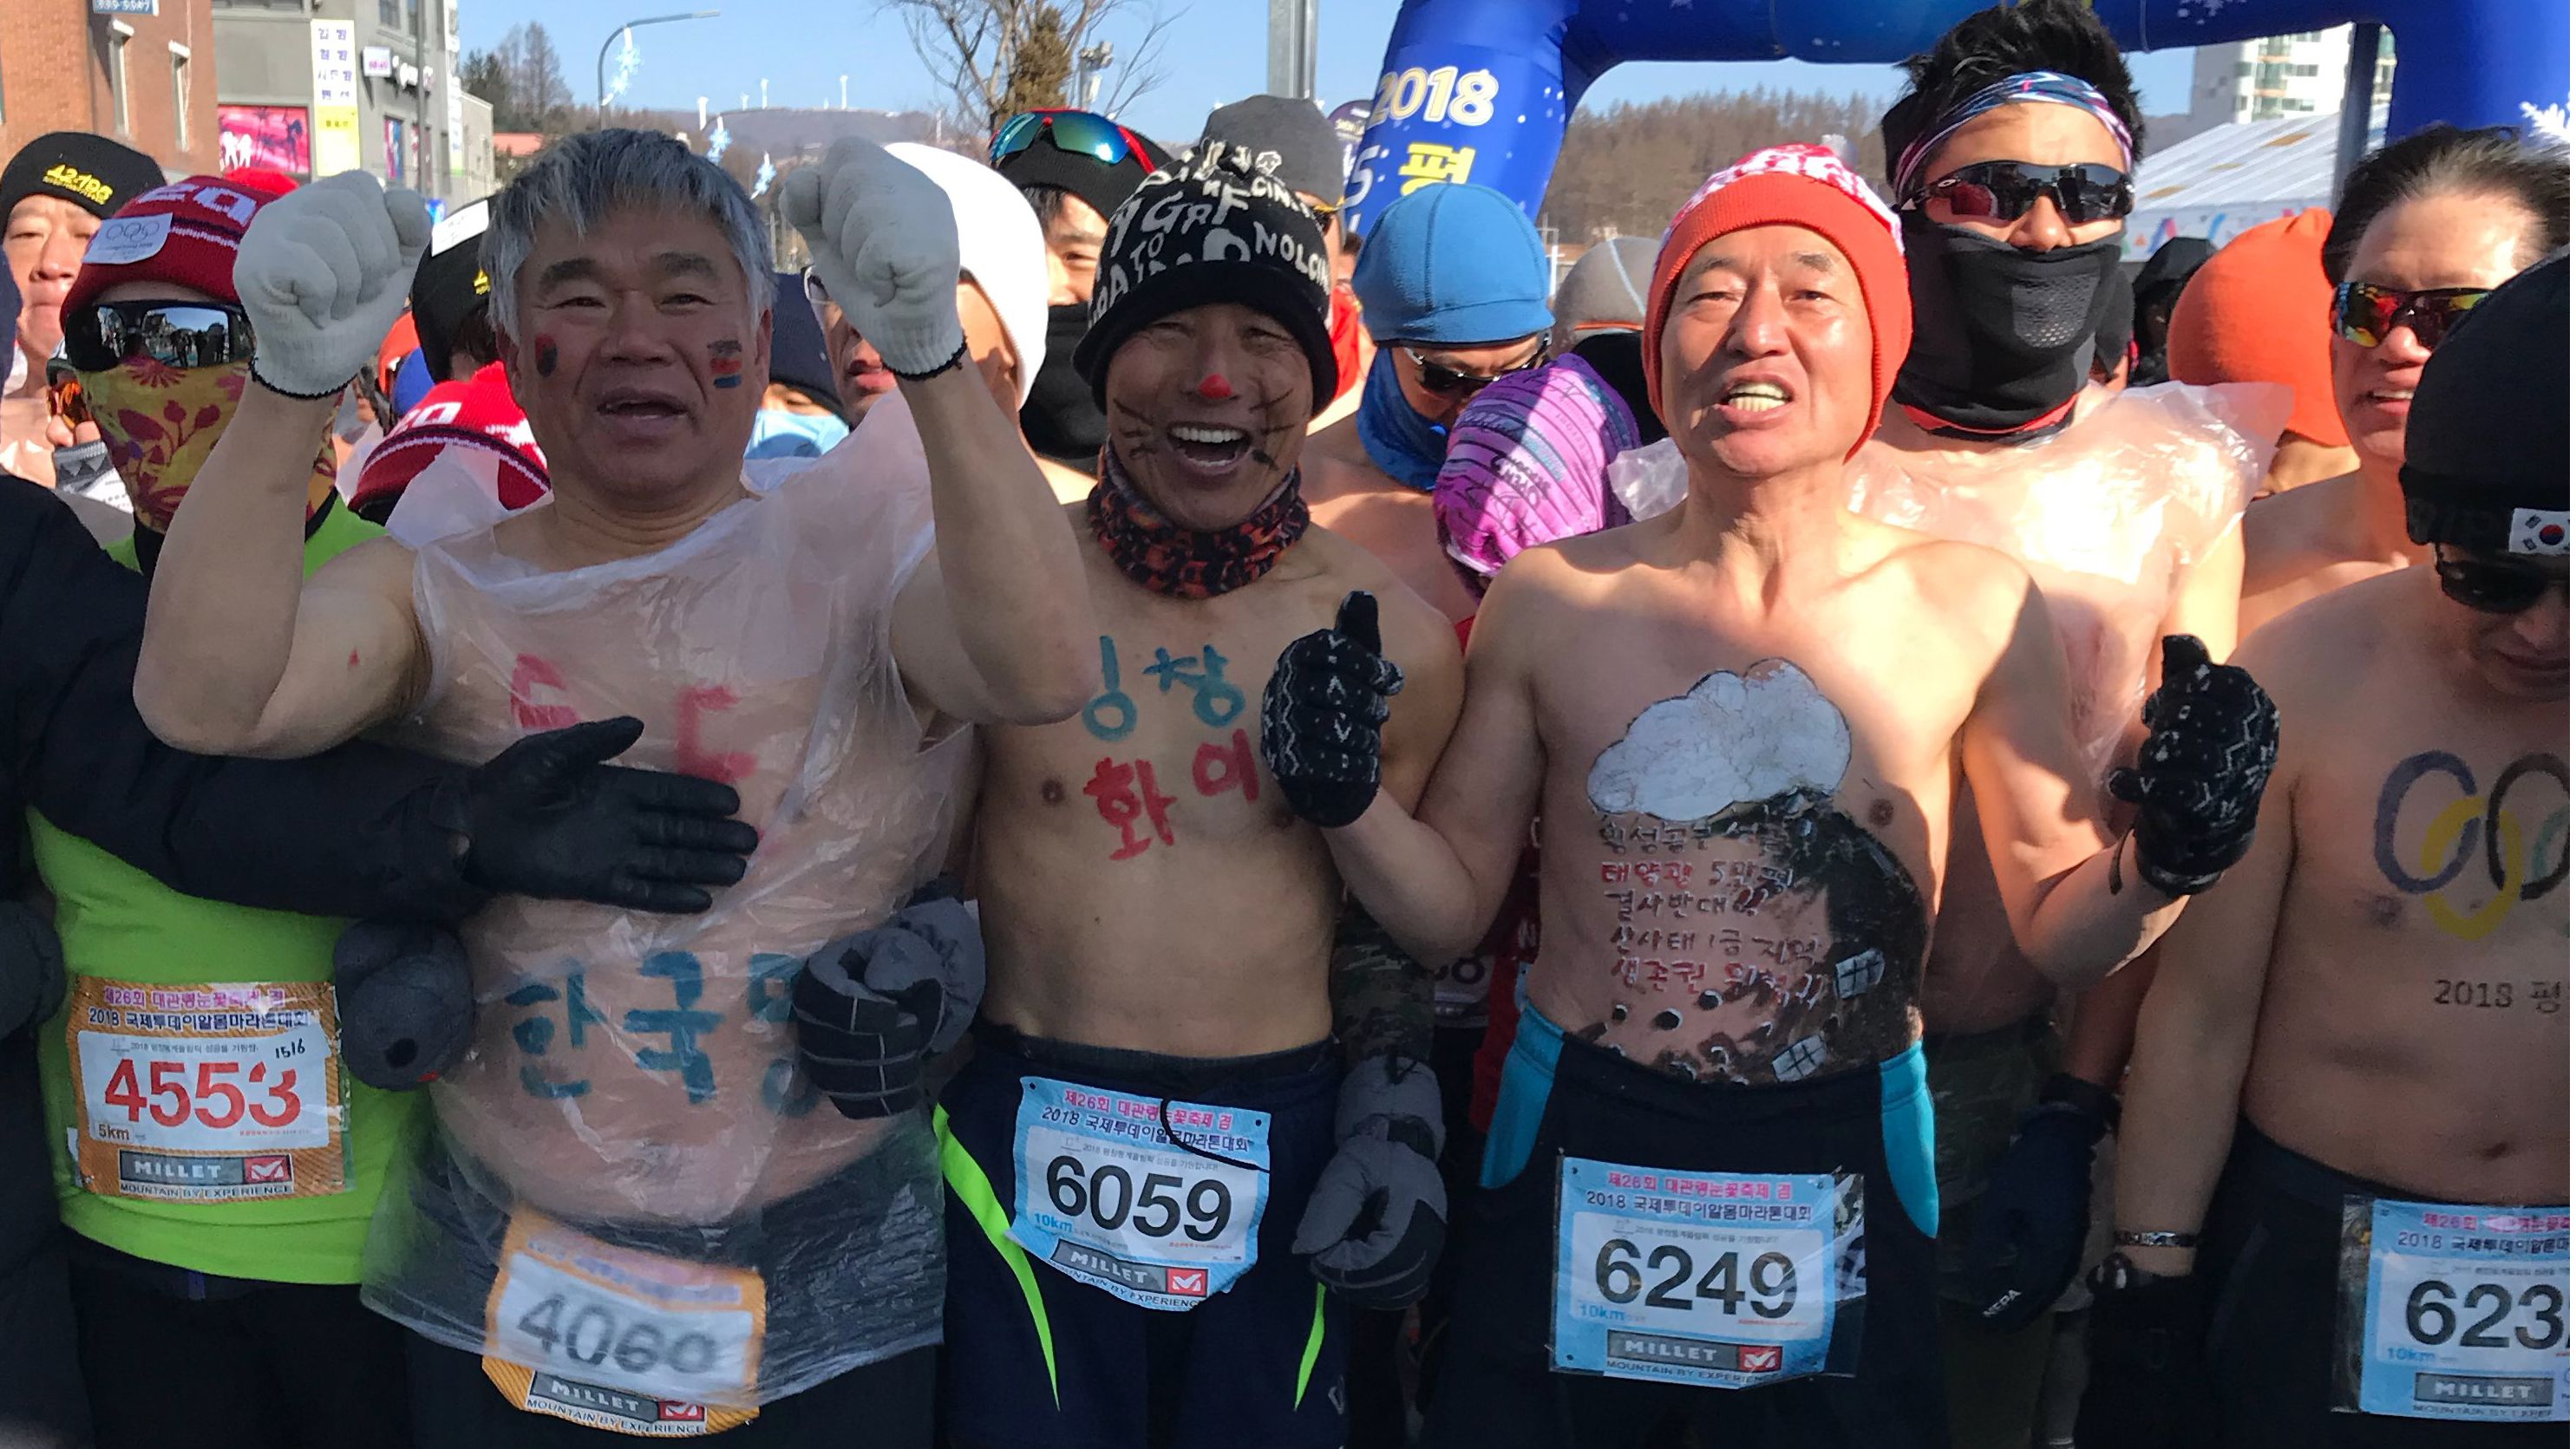 These are some of the South Koreans who were brave enough to take part in the 26th annual '"naked marathon" in Pyeongchang on Saturday.